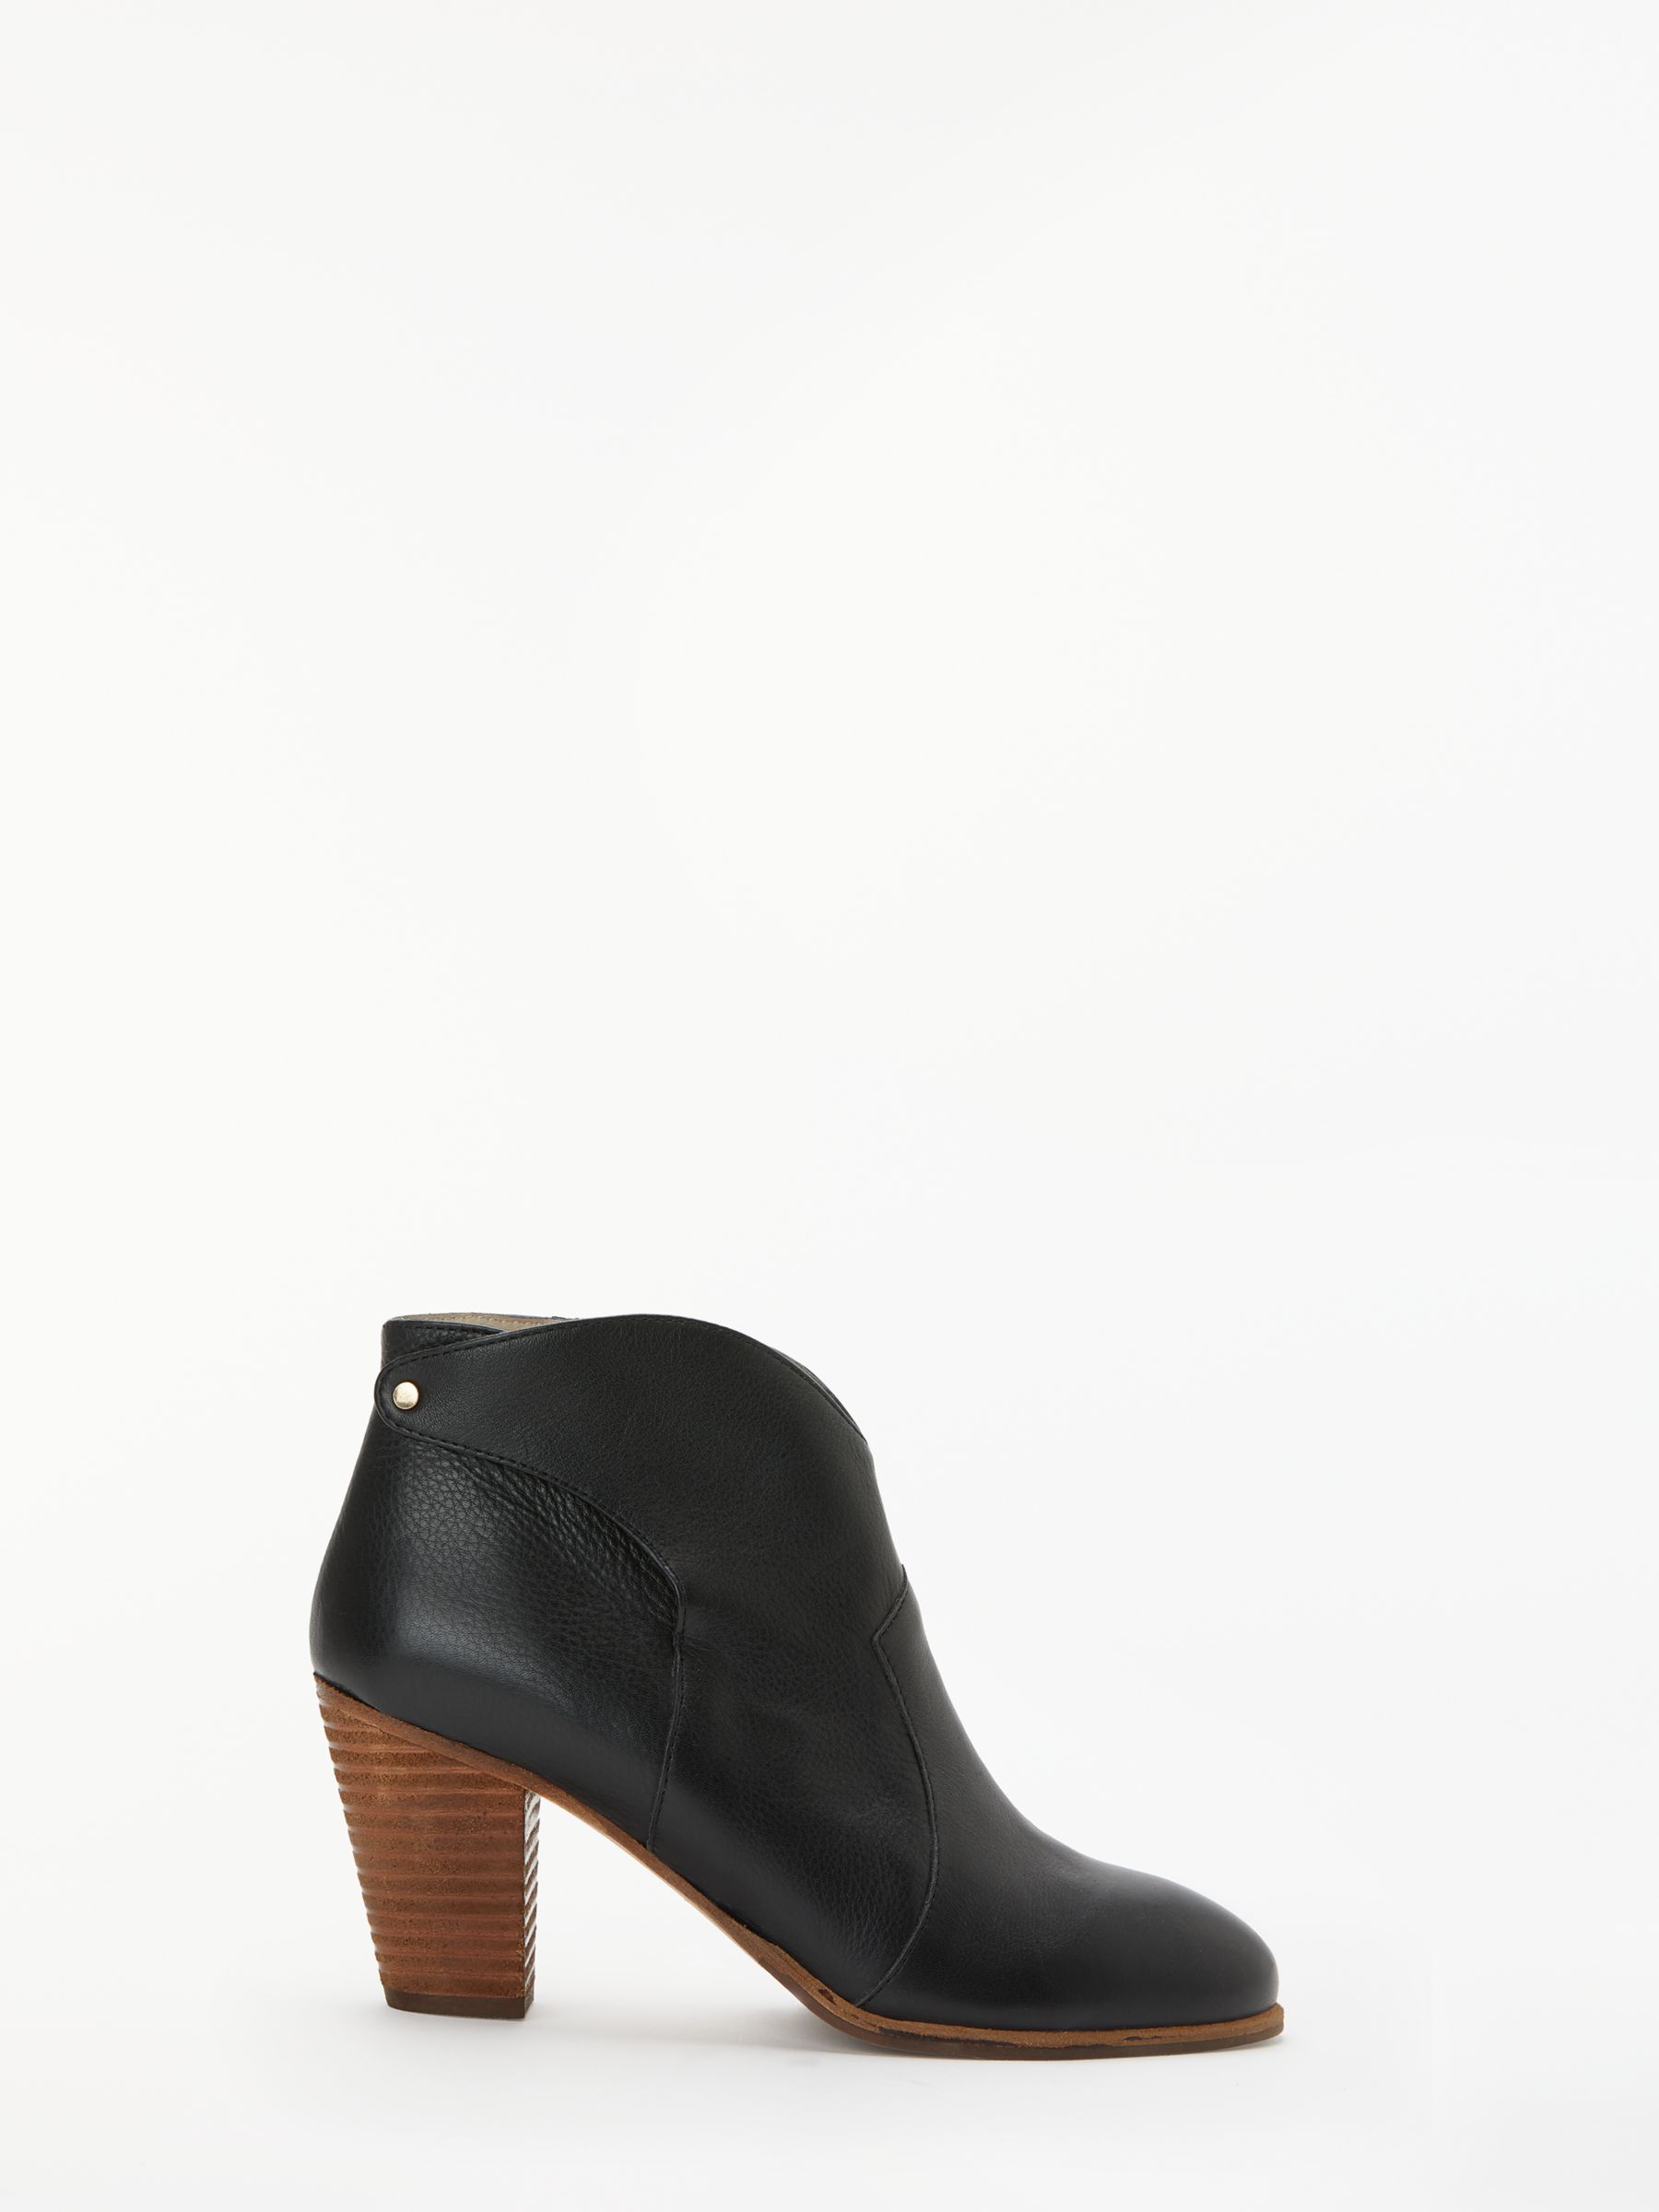 Boden Hoxton Block Heeled Ankle Boots